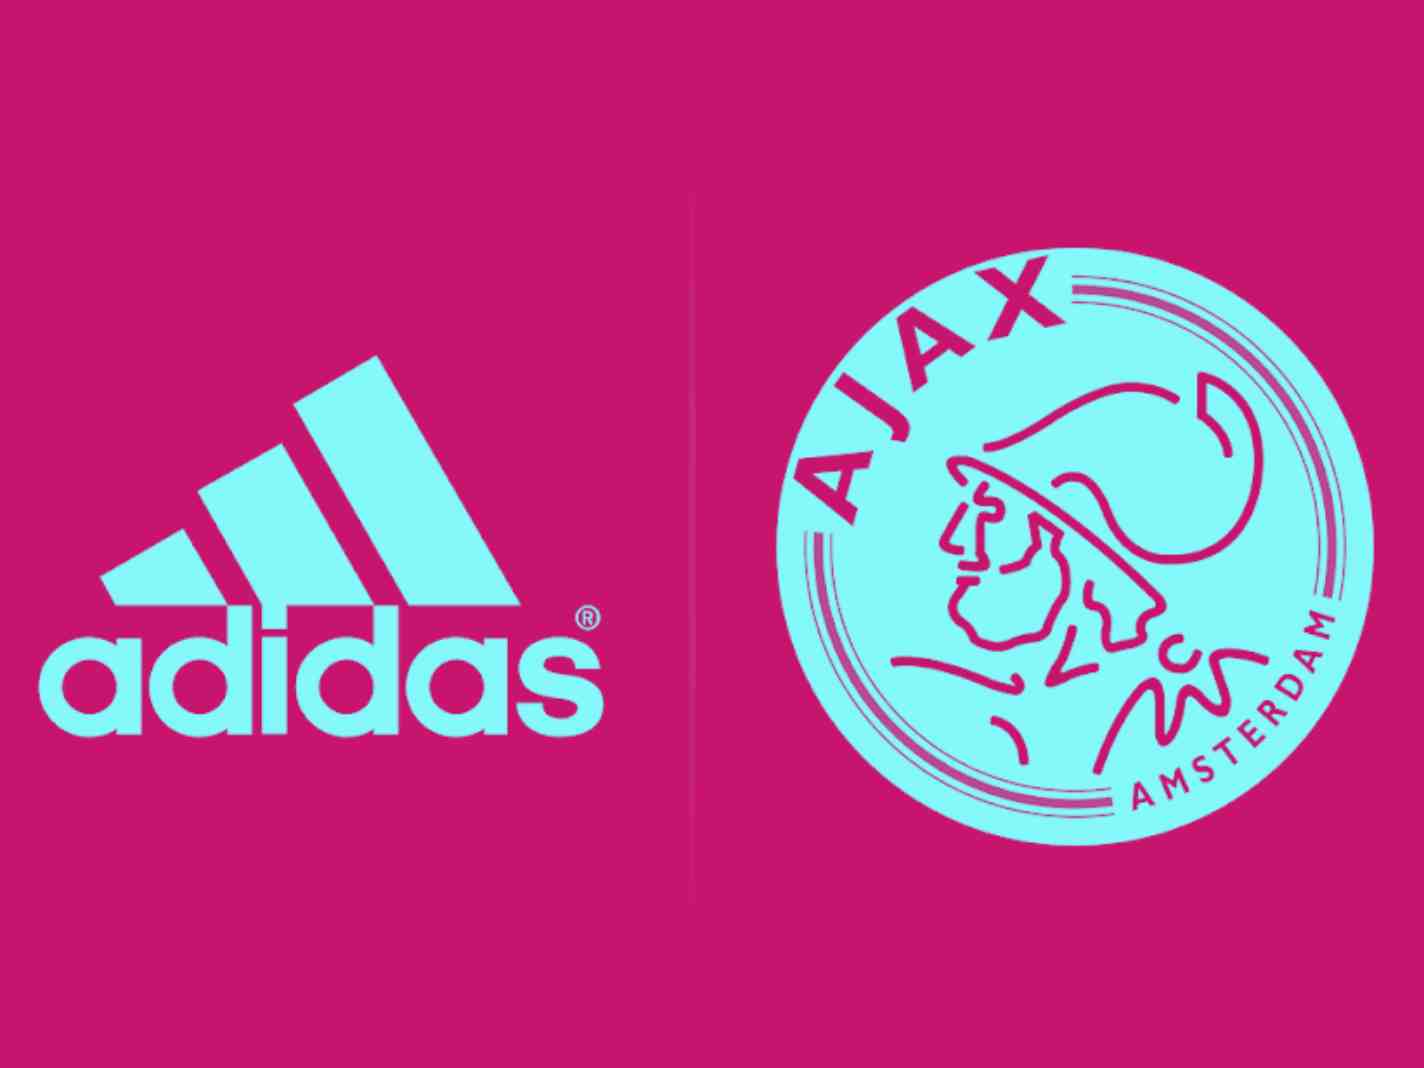 Sneak Peek at the Leaked Ajax Away Kit for the 23/24 Season from Adidas